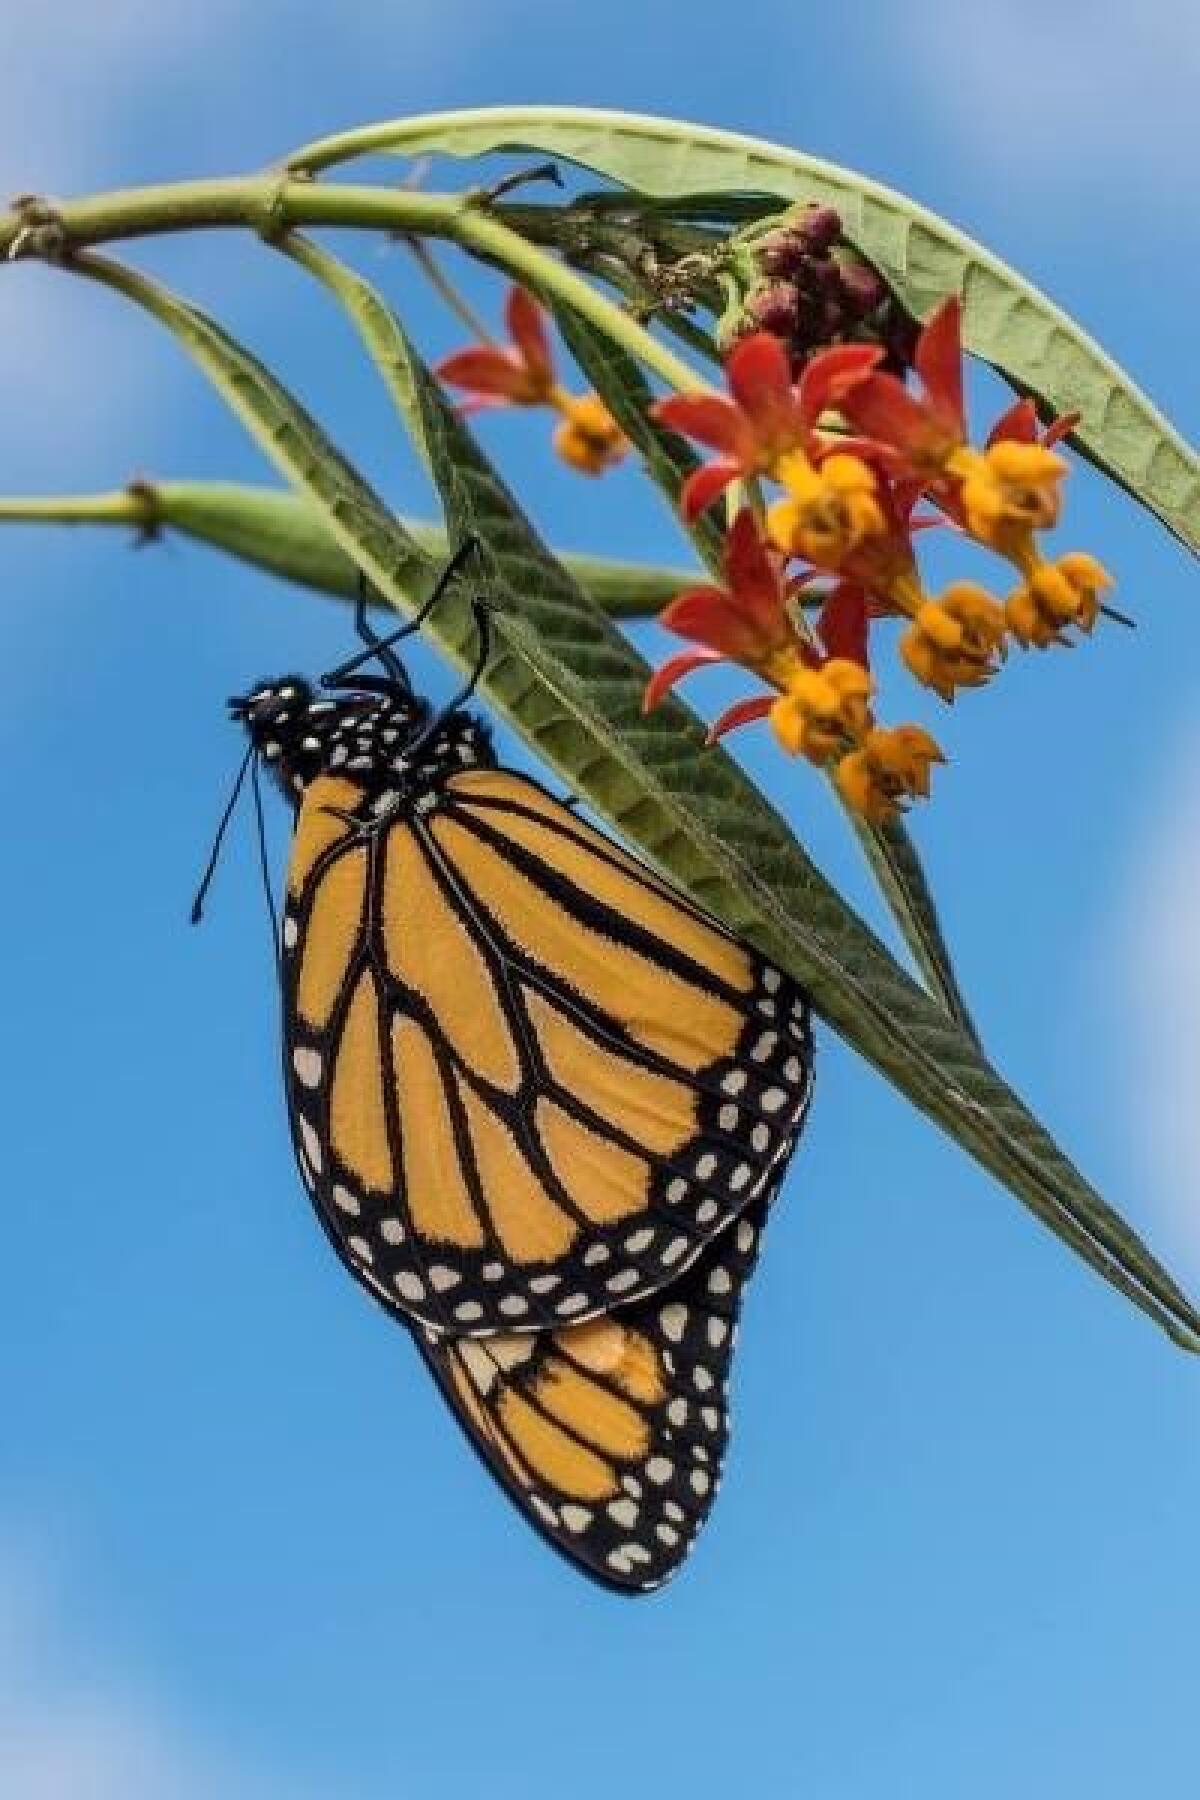 A monarch butterfly perched on non-native tropical milkweed